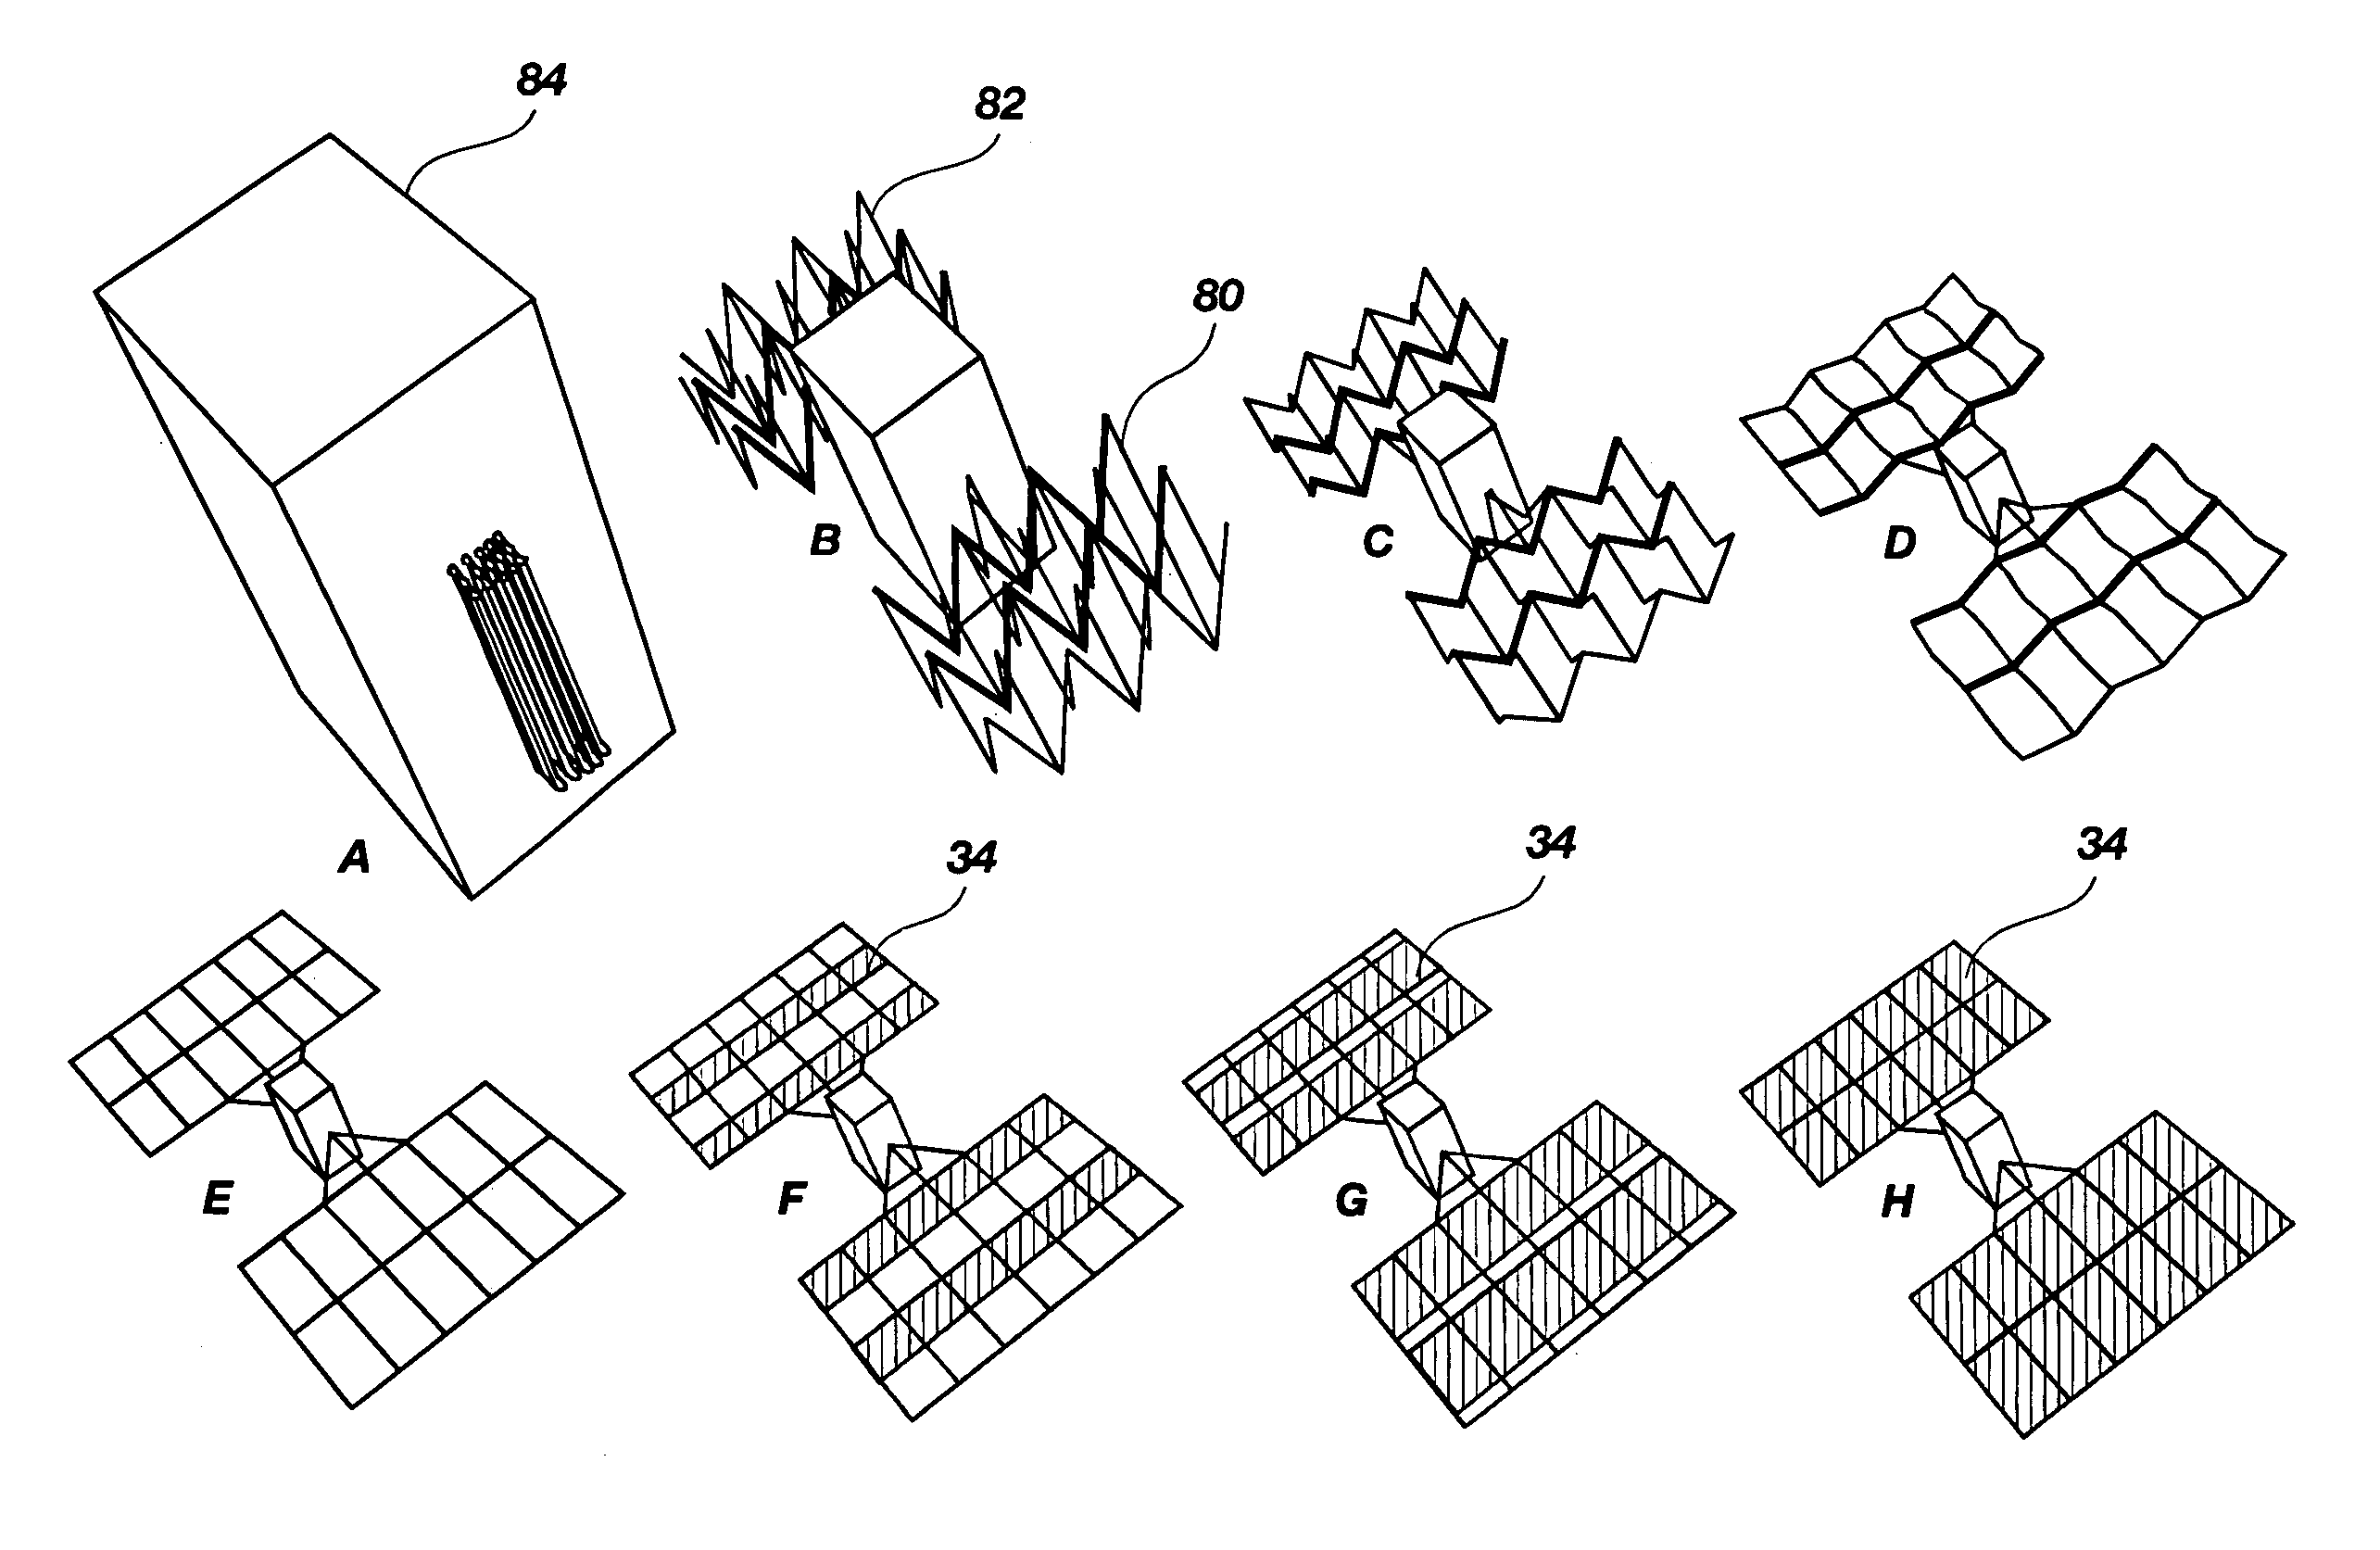 Structures including synchronously deployable frame members and methods of deploying the same